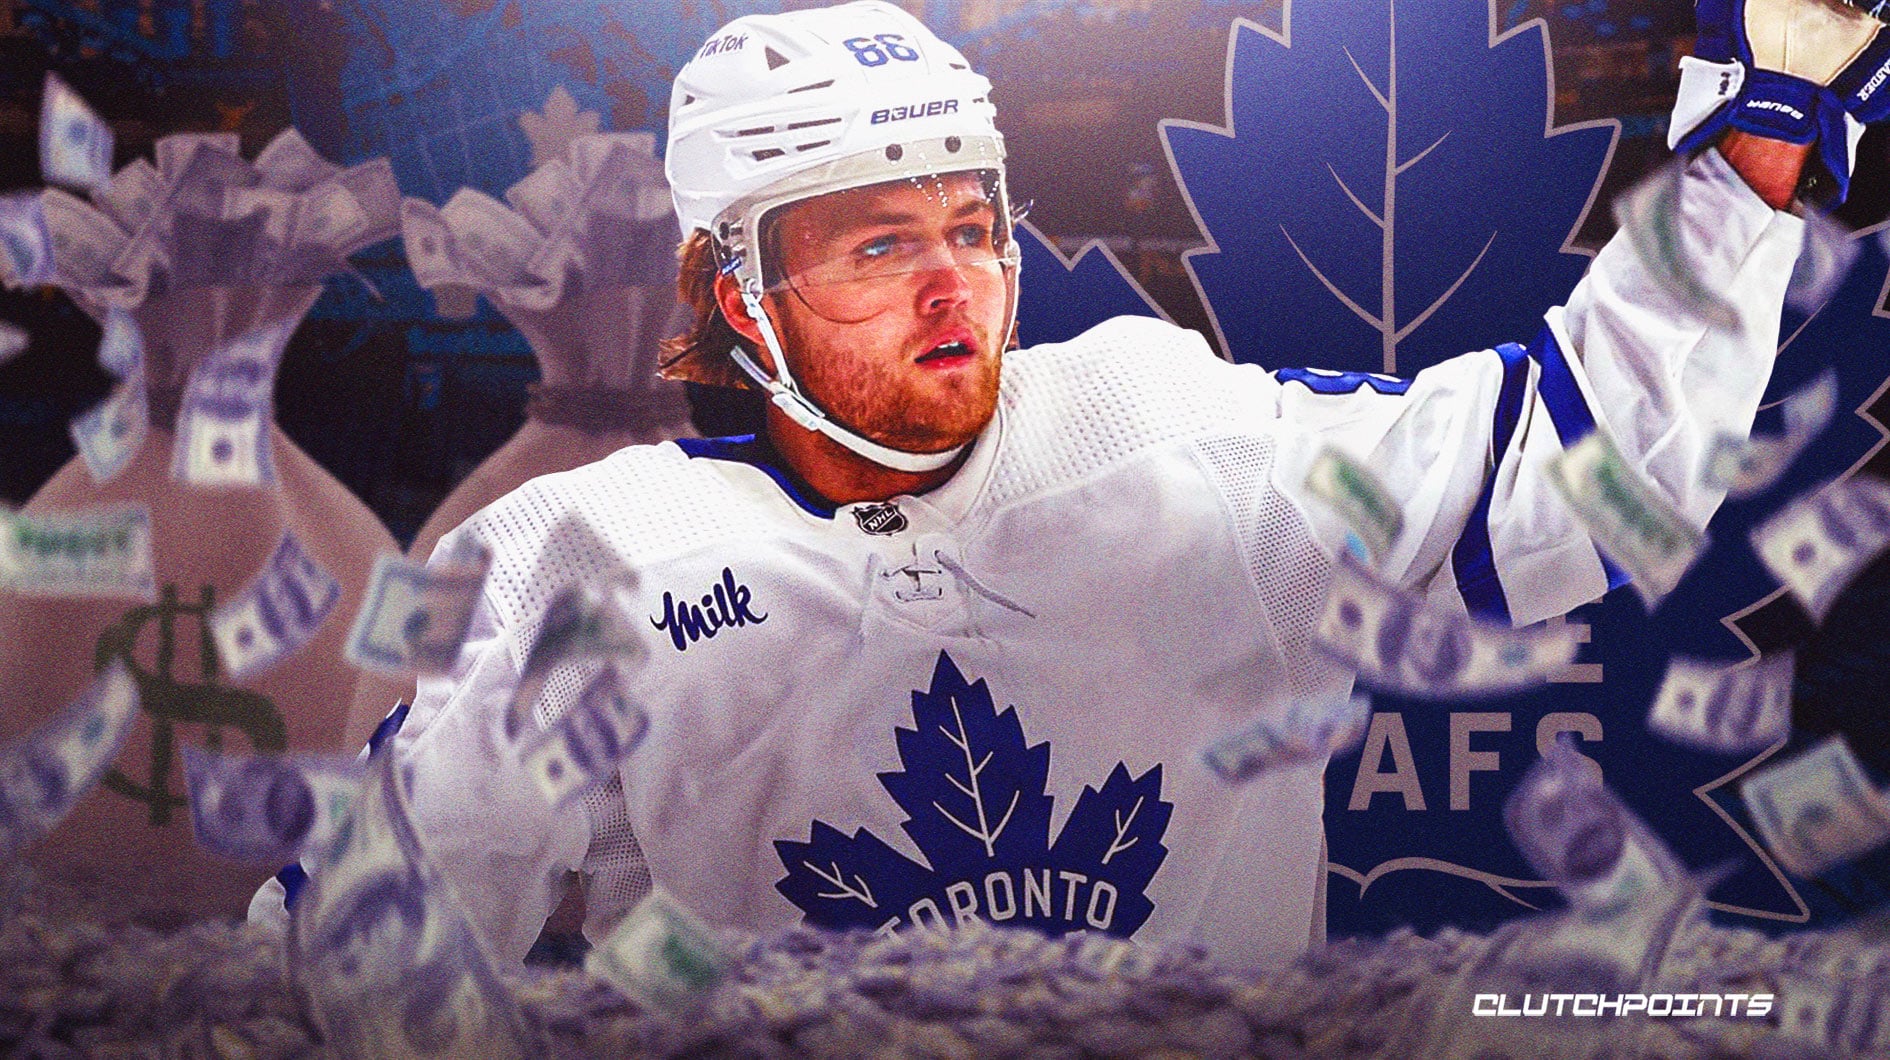 Toronto Maple Leafs updated their - Toronto Maple Leafs